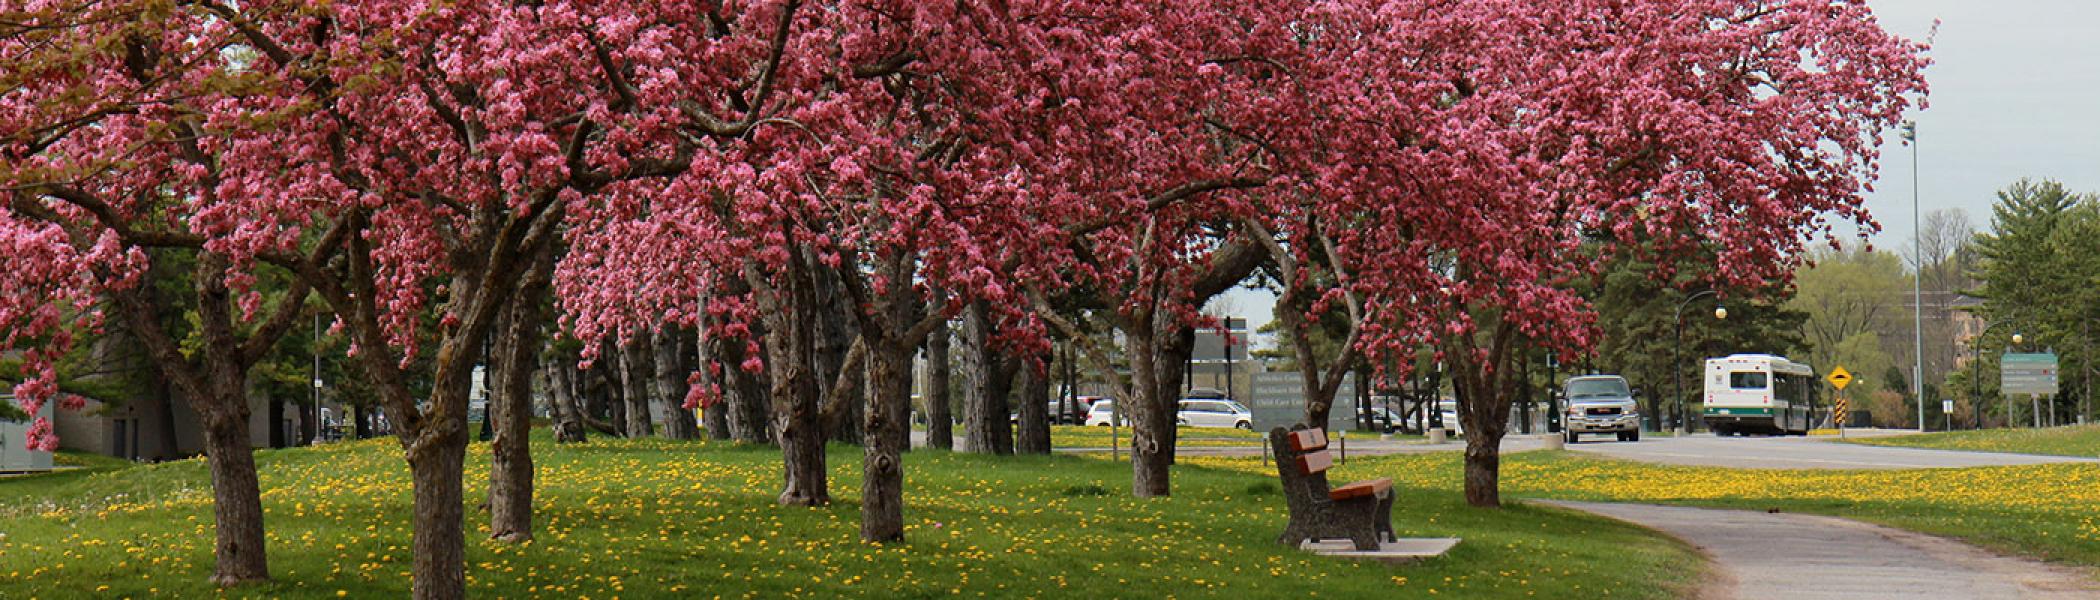 Trees blossoming on a spring day at Trent's Symons campus